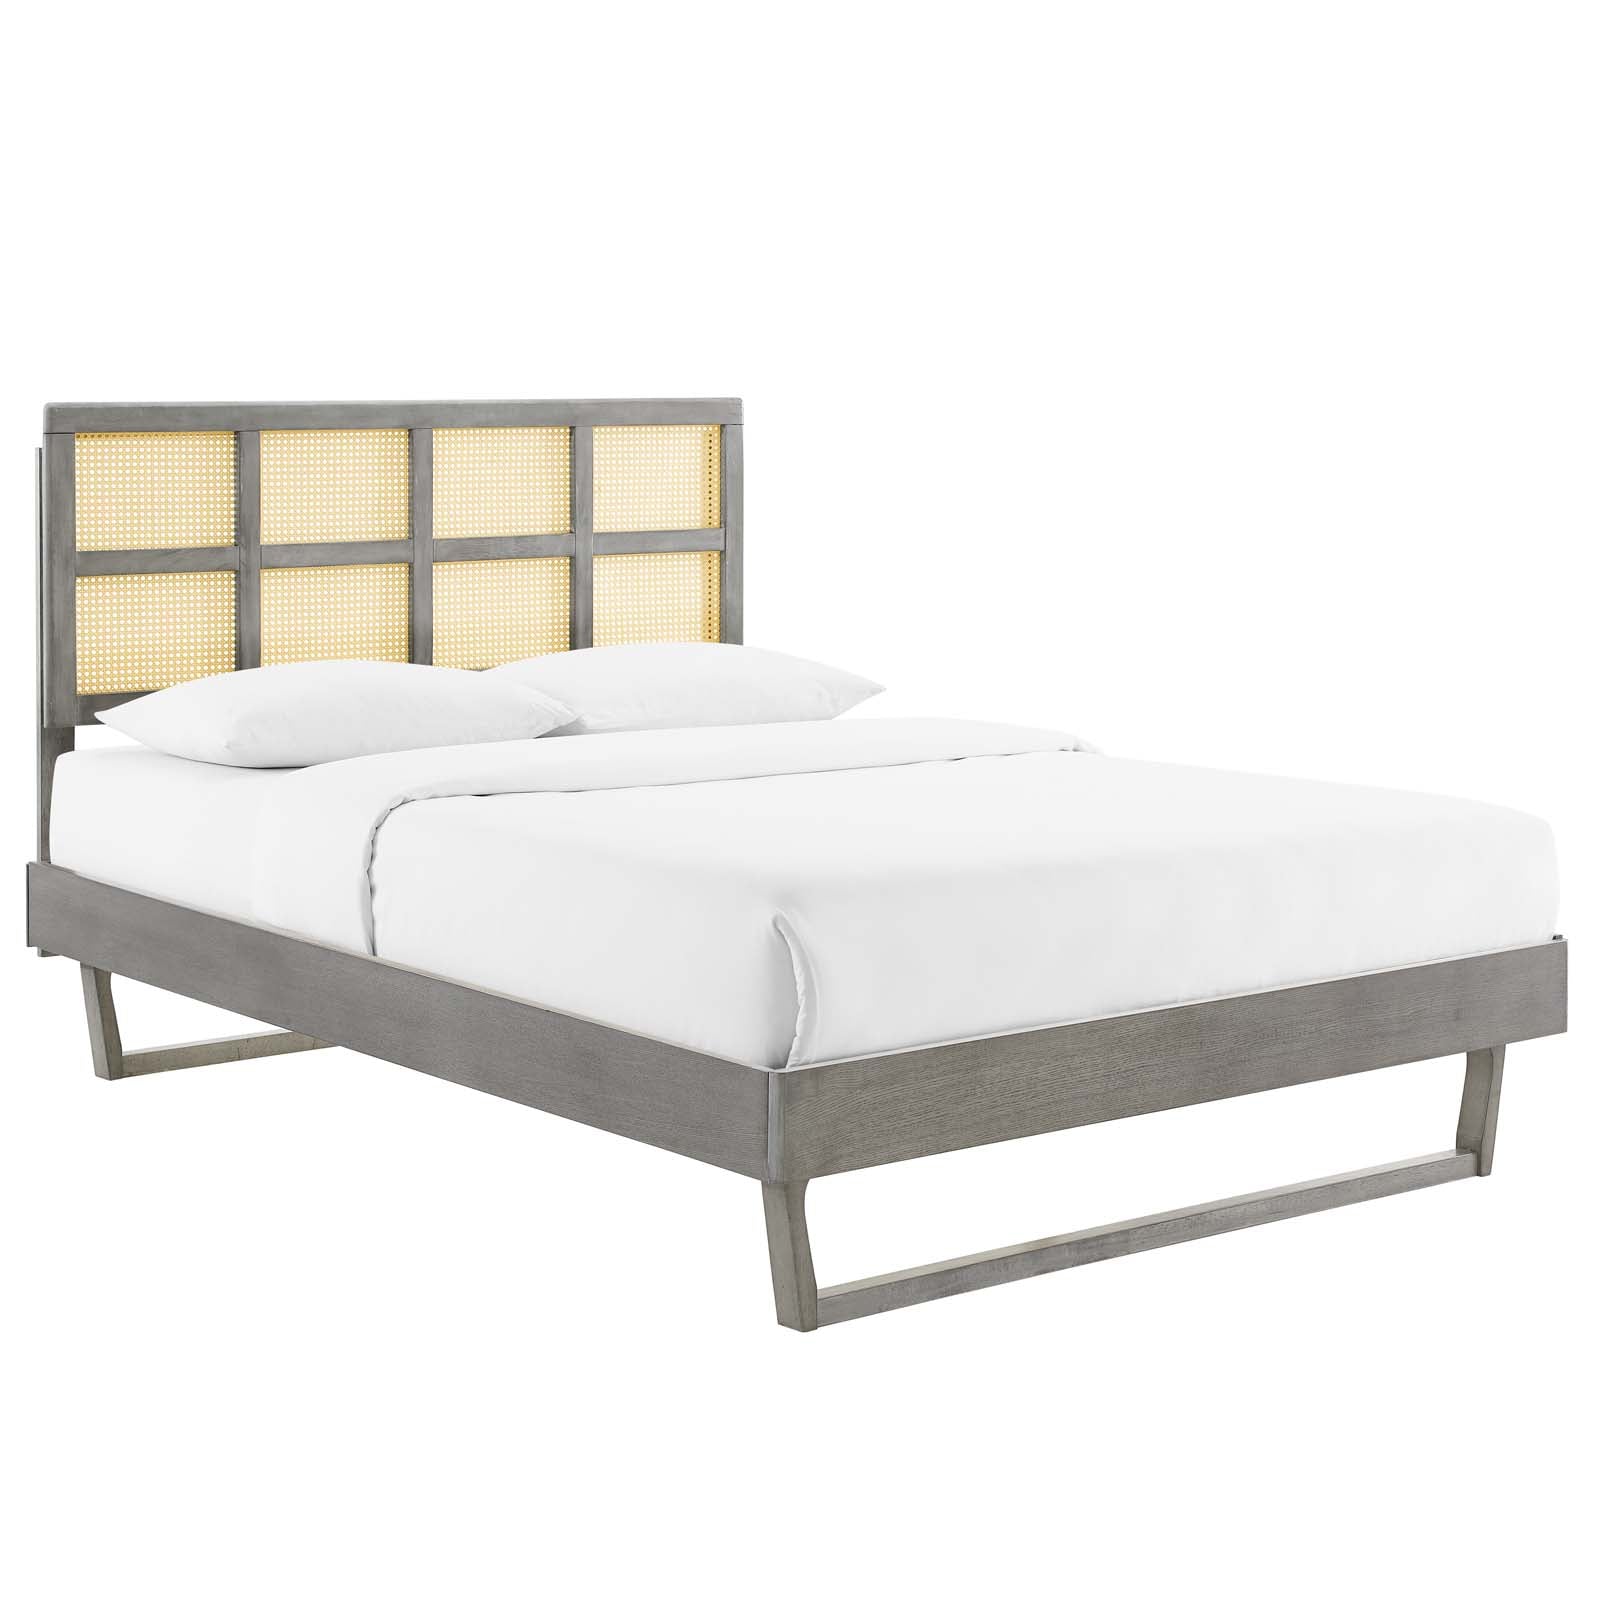 Sidney Cane and Wood King Platform Bed With Angular Legs - East Shore Modern Home Furnishings